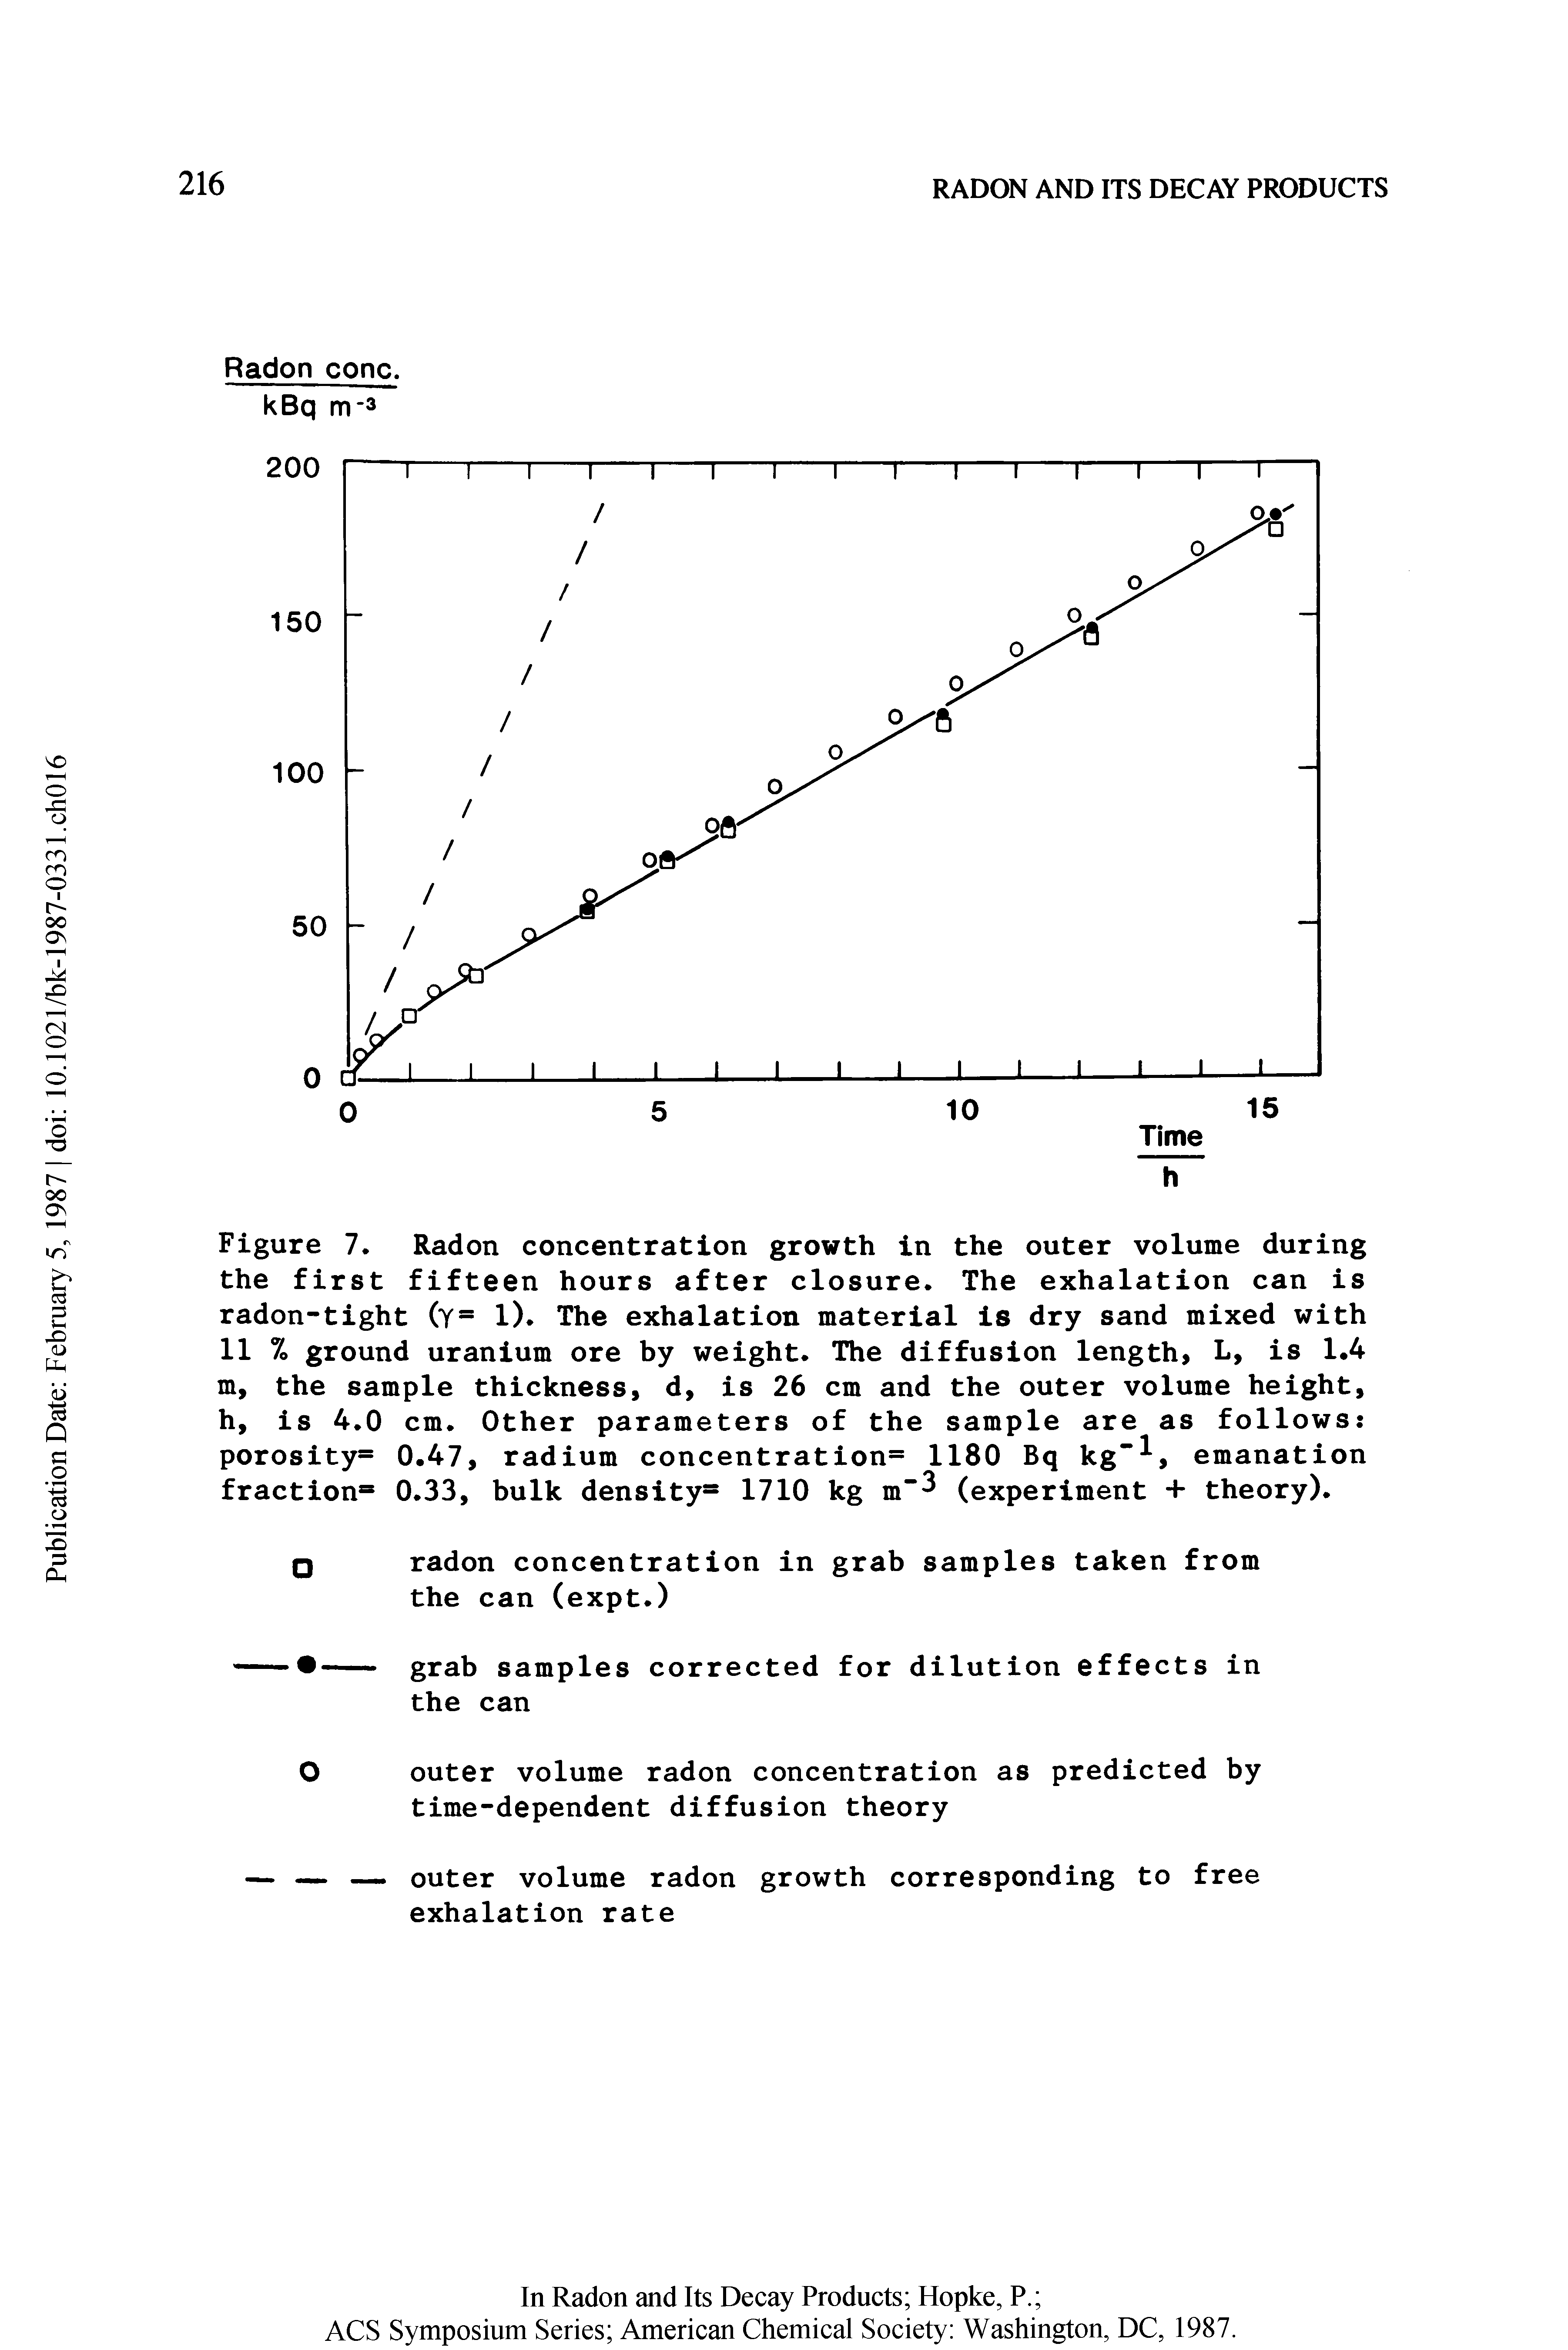 Figure 7. Radon concentration growth in the outer volume during the first fifteen hours after closure. The exhalation can is radon-tight (y= 1). The exhalation material is dry sand mixed with 11 % ground uranium ore by weight. The diffusion length, L, is 1.4 m, the sample thickness, d, is 26 cm and the outer volume height, h, is 4.0 cm. Other parameters of the sample are as follows porosity 0.47, radium concentration 1180 Bq kg, emanation fraction 0.33, bulk density 1710 kg m 3 (experiment + theory).